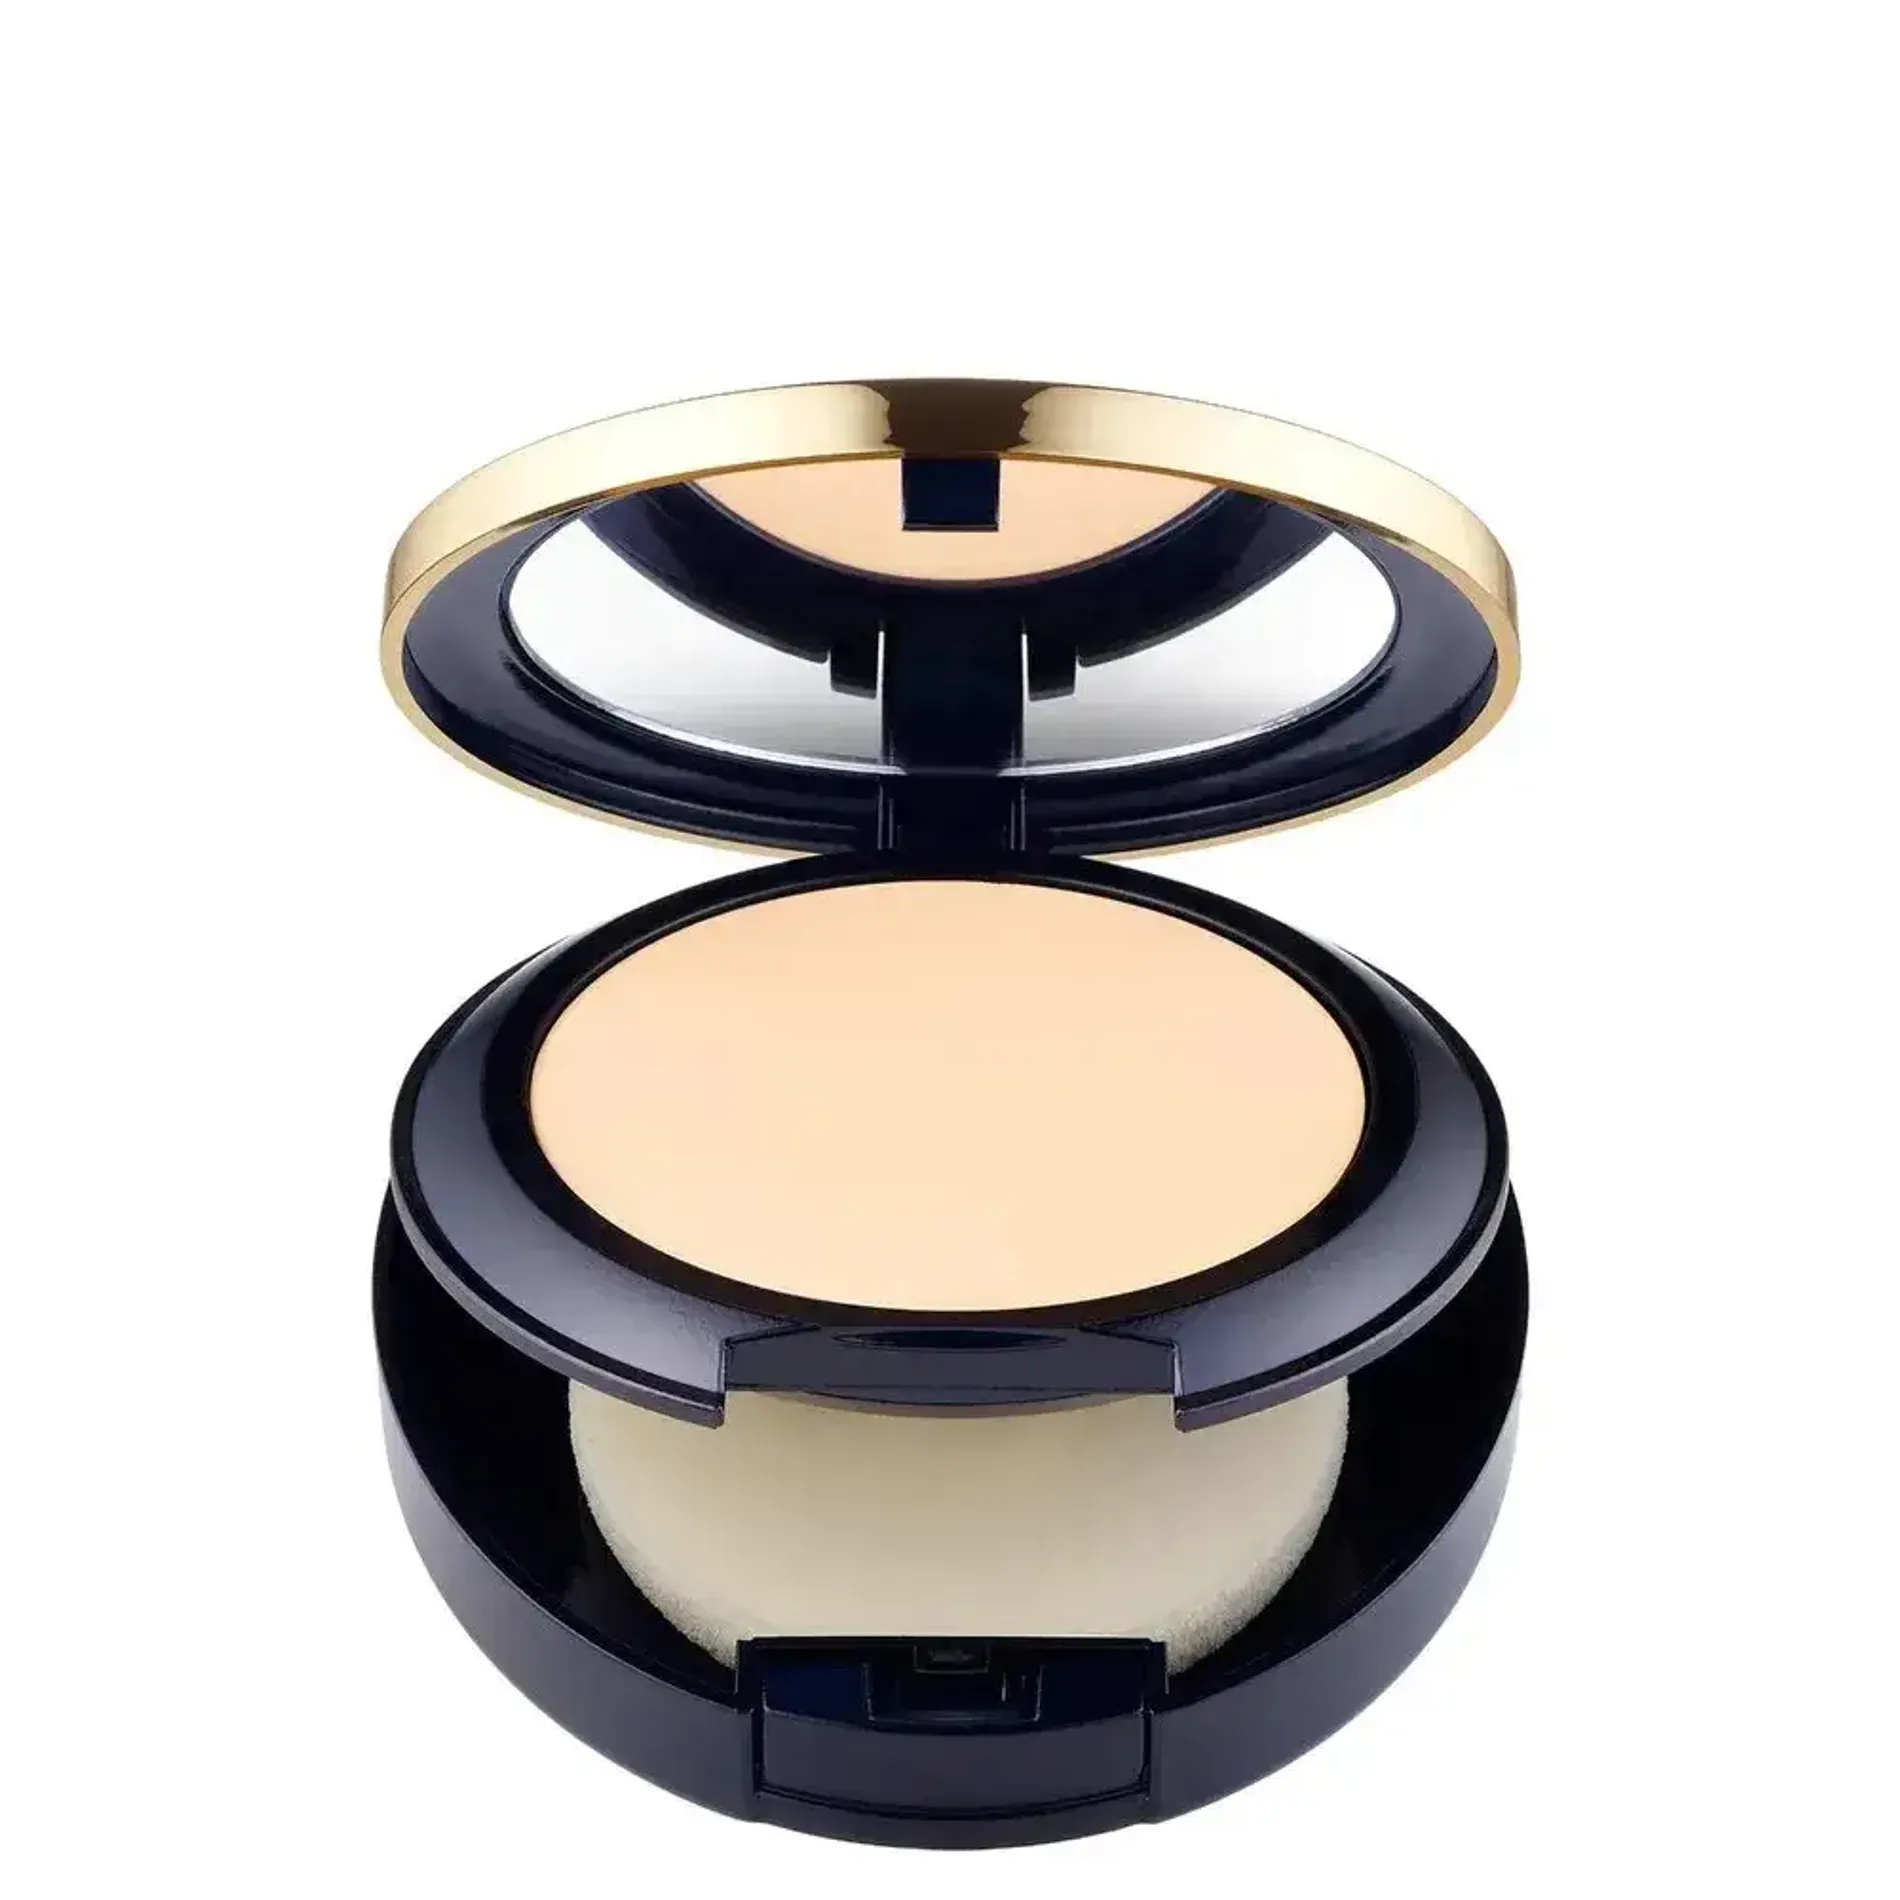 phan-phu-estee-lauder-double-wear-stay-in-place-matte-powder-foundation-12g-2